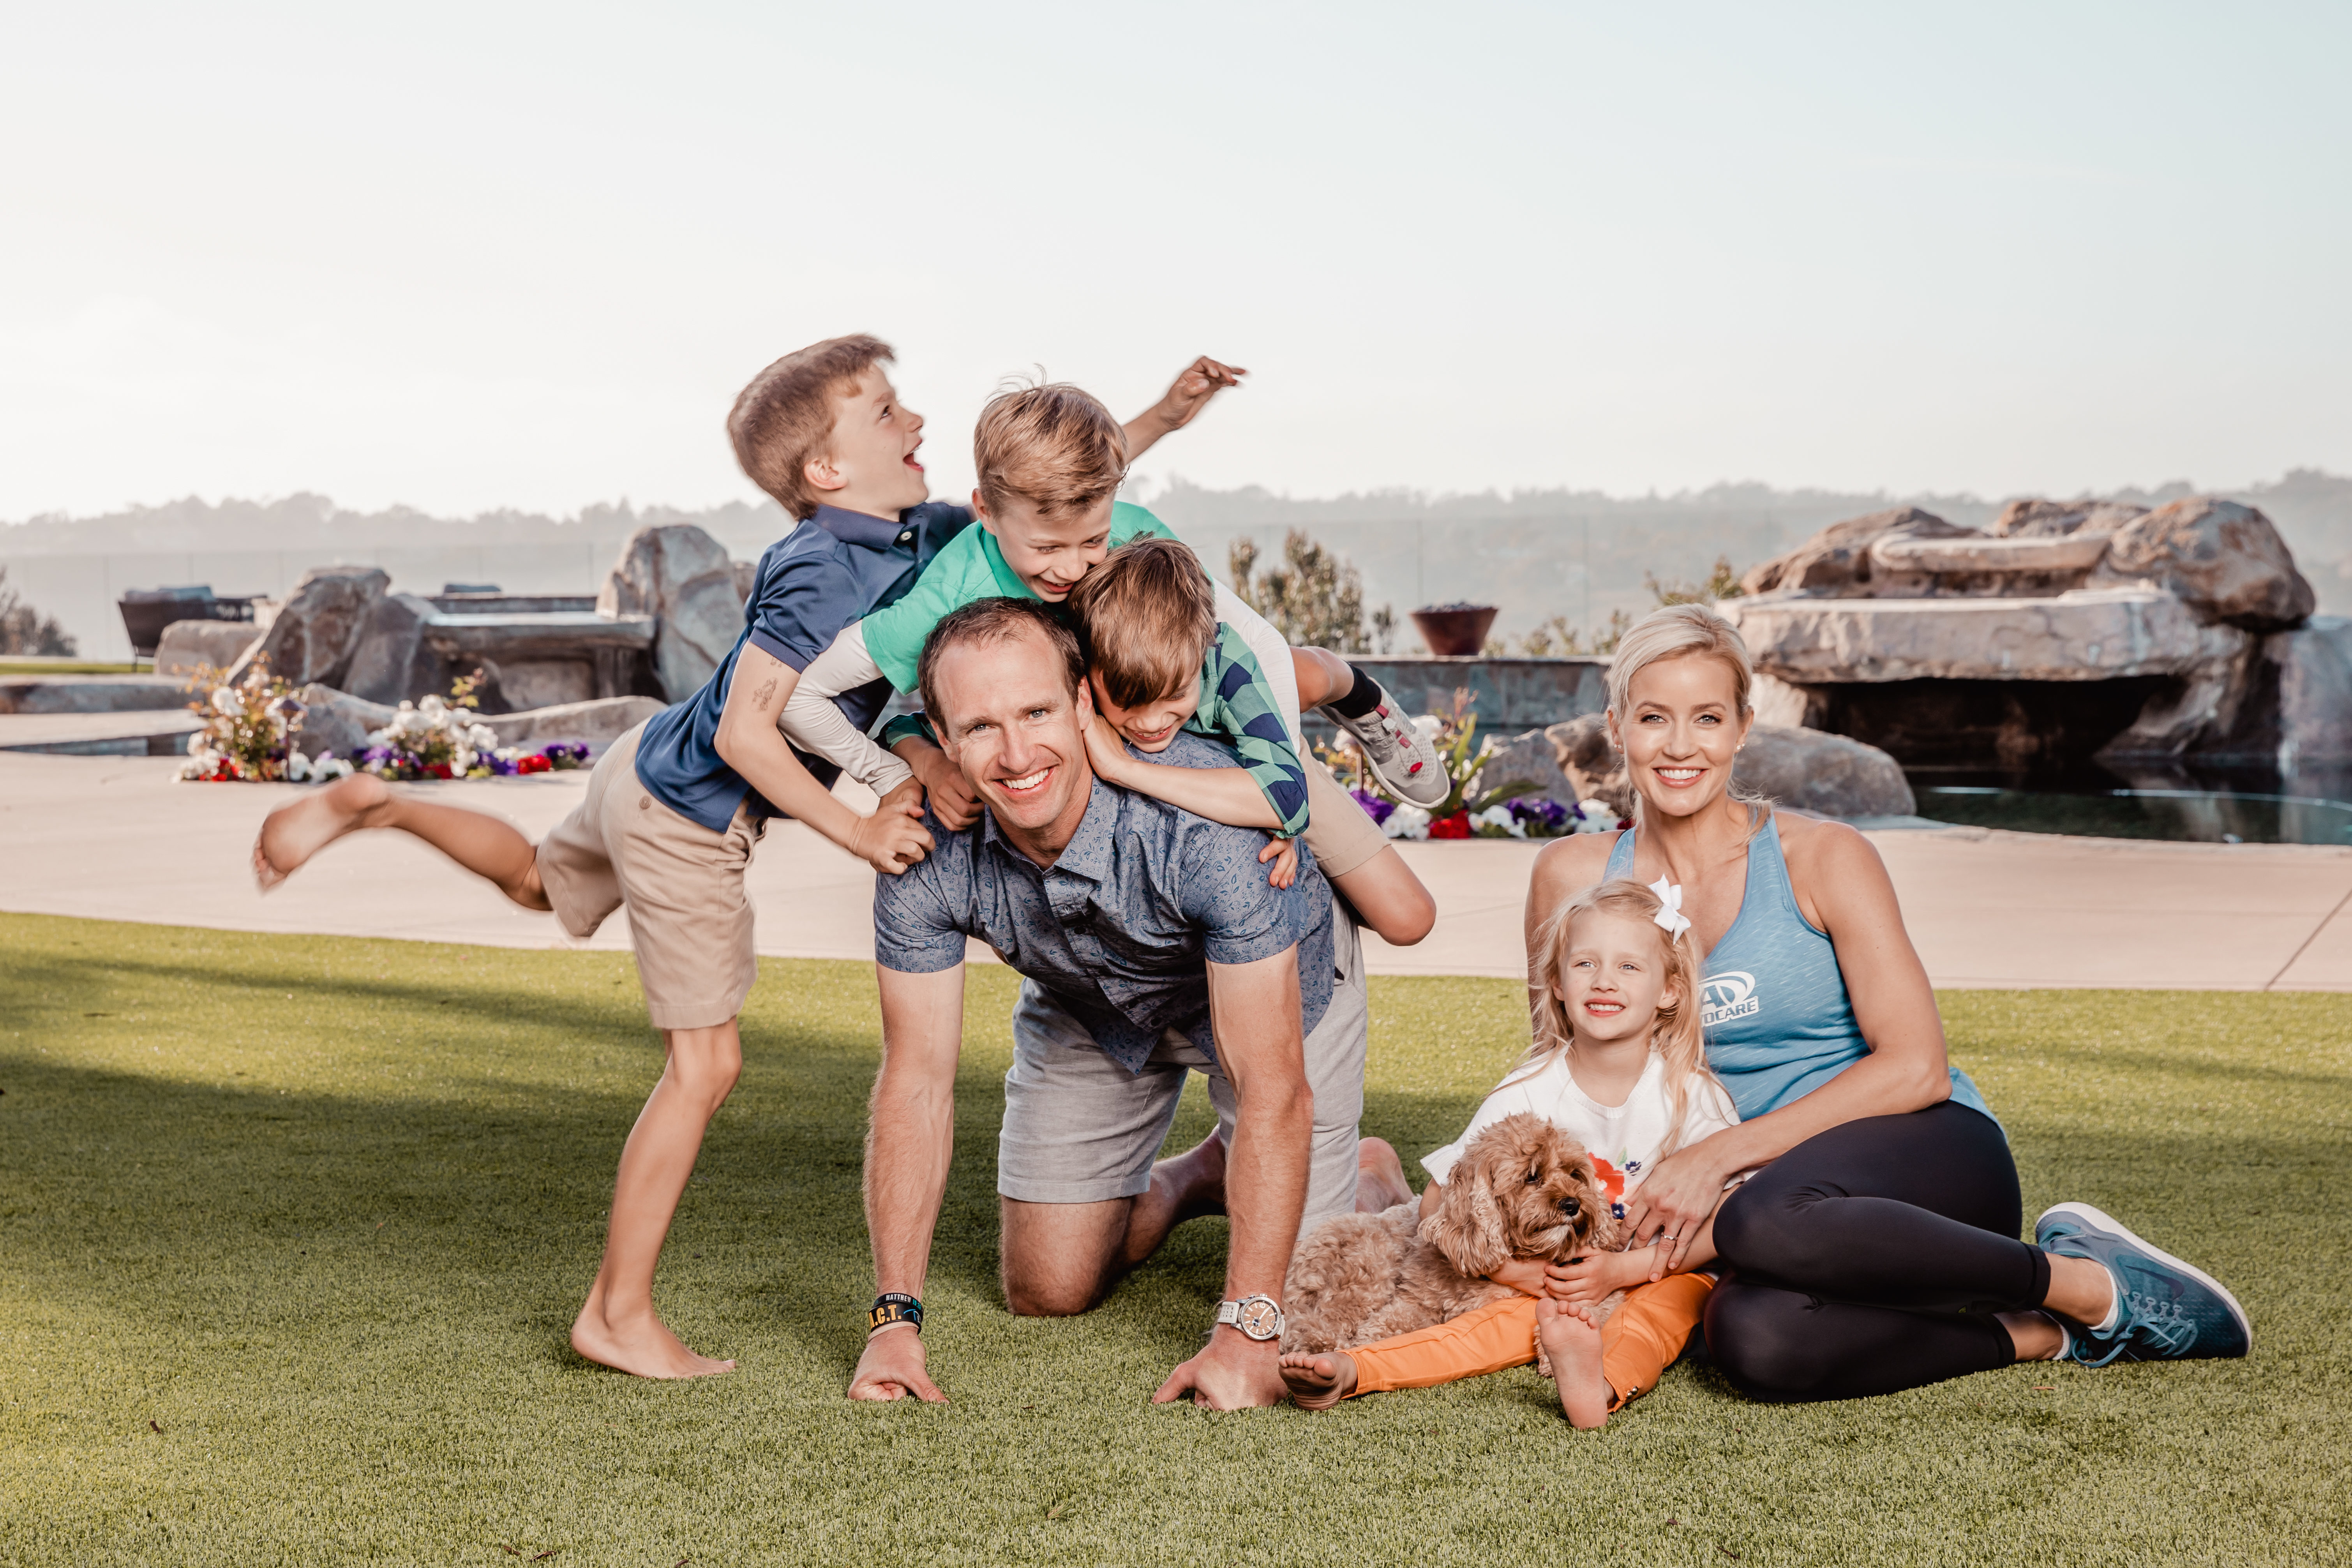 AdvoCare Endorser Drew Brees Enters 20th Season Balancing Football, Family and Fitness